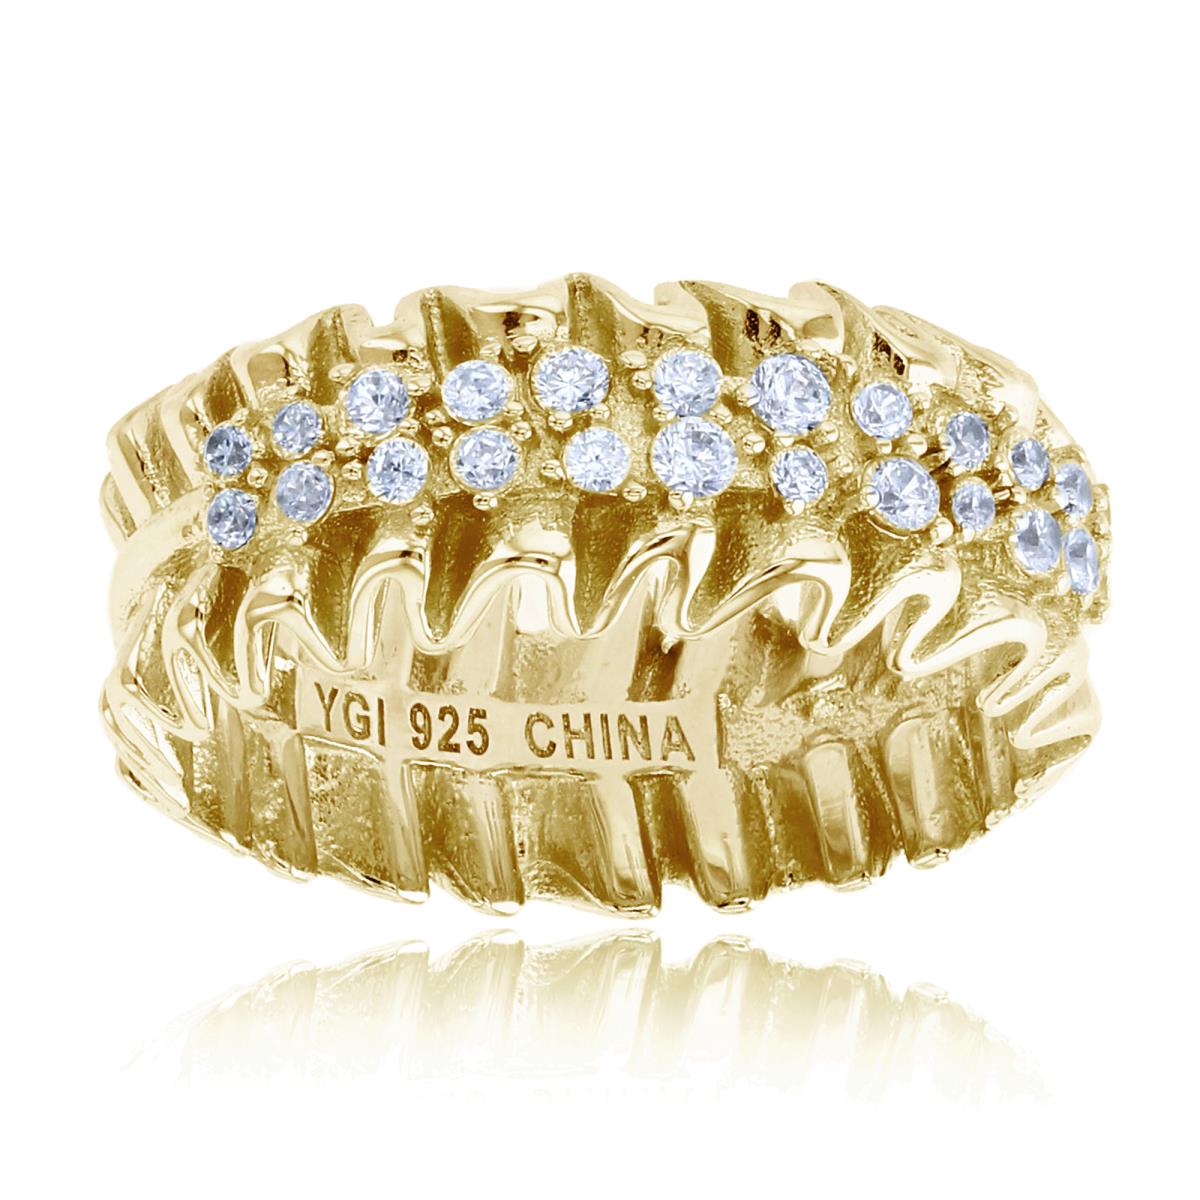 Sterling Silver+1Micron Yellow Gold Rnd CZ Row Center & Alternate Polish/Satin on Waved Sides Band